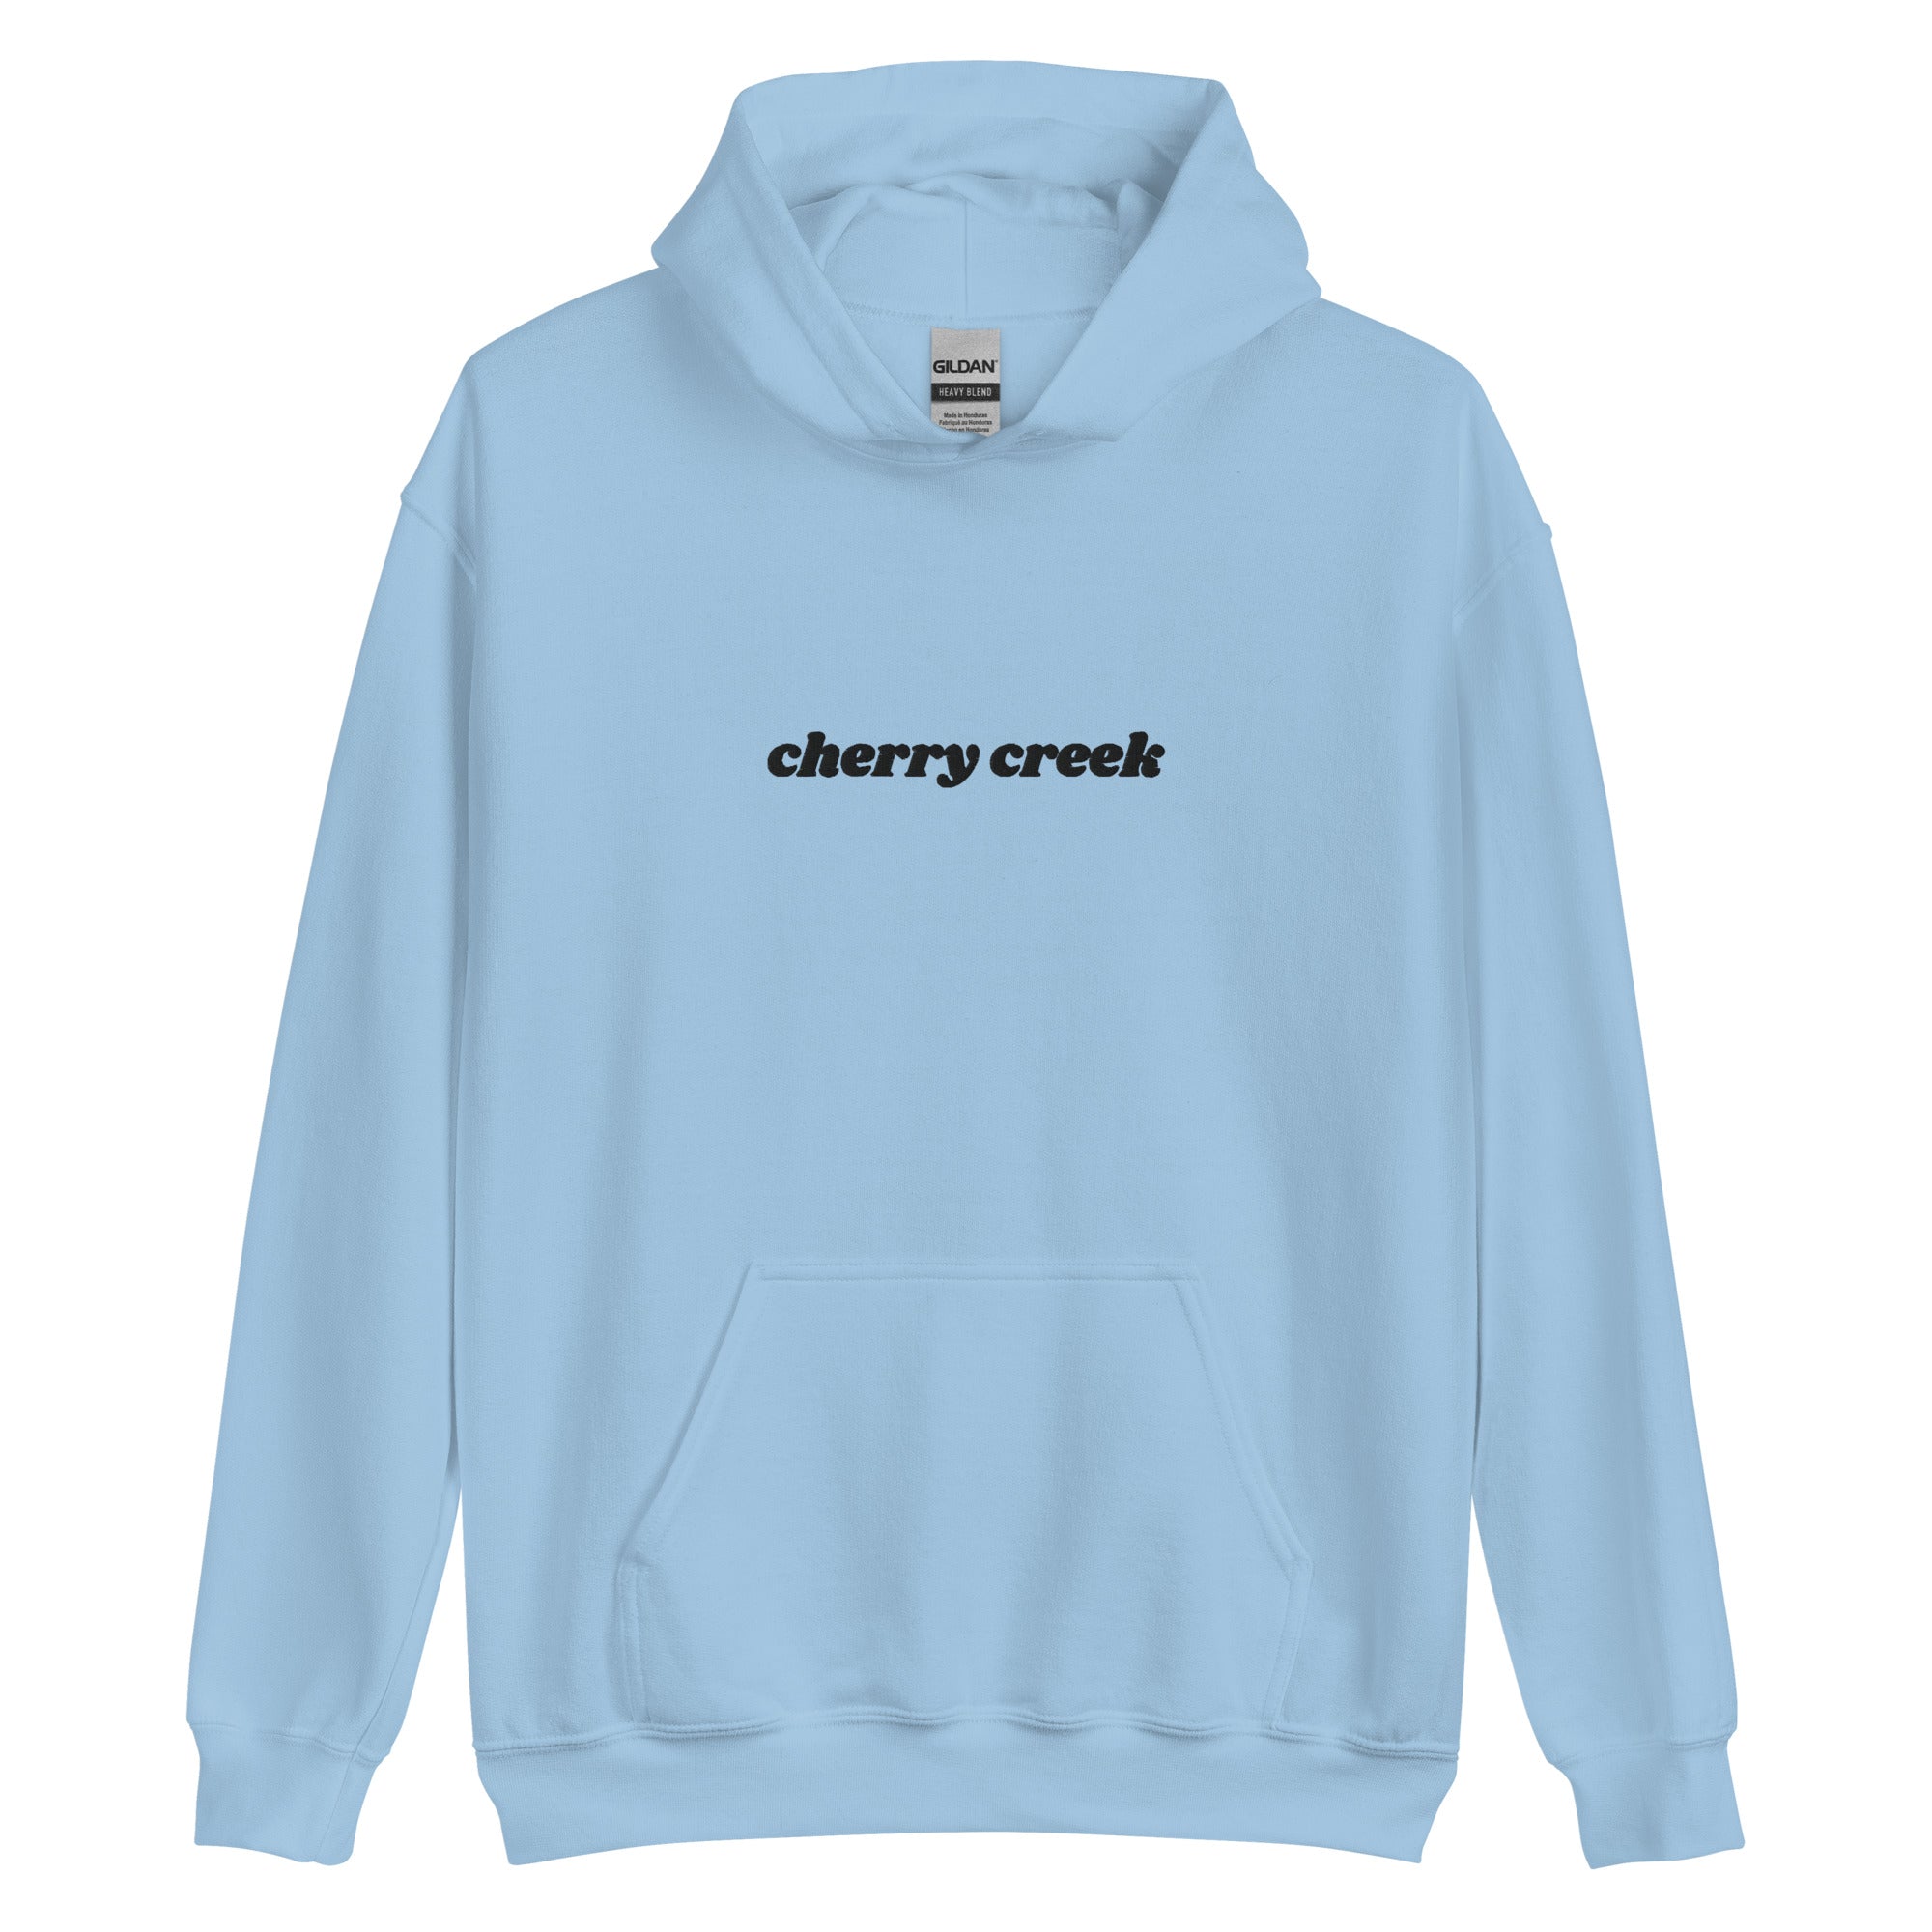 Unisex Embroidered Hoodie (Multiple Color Options)